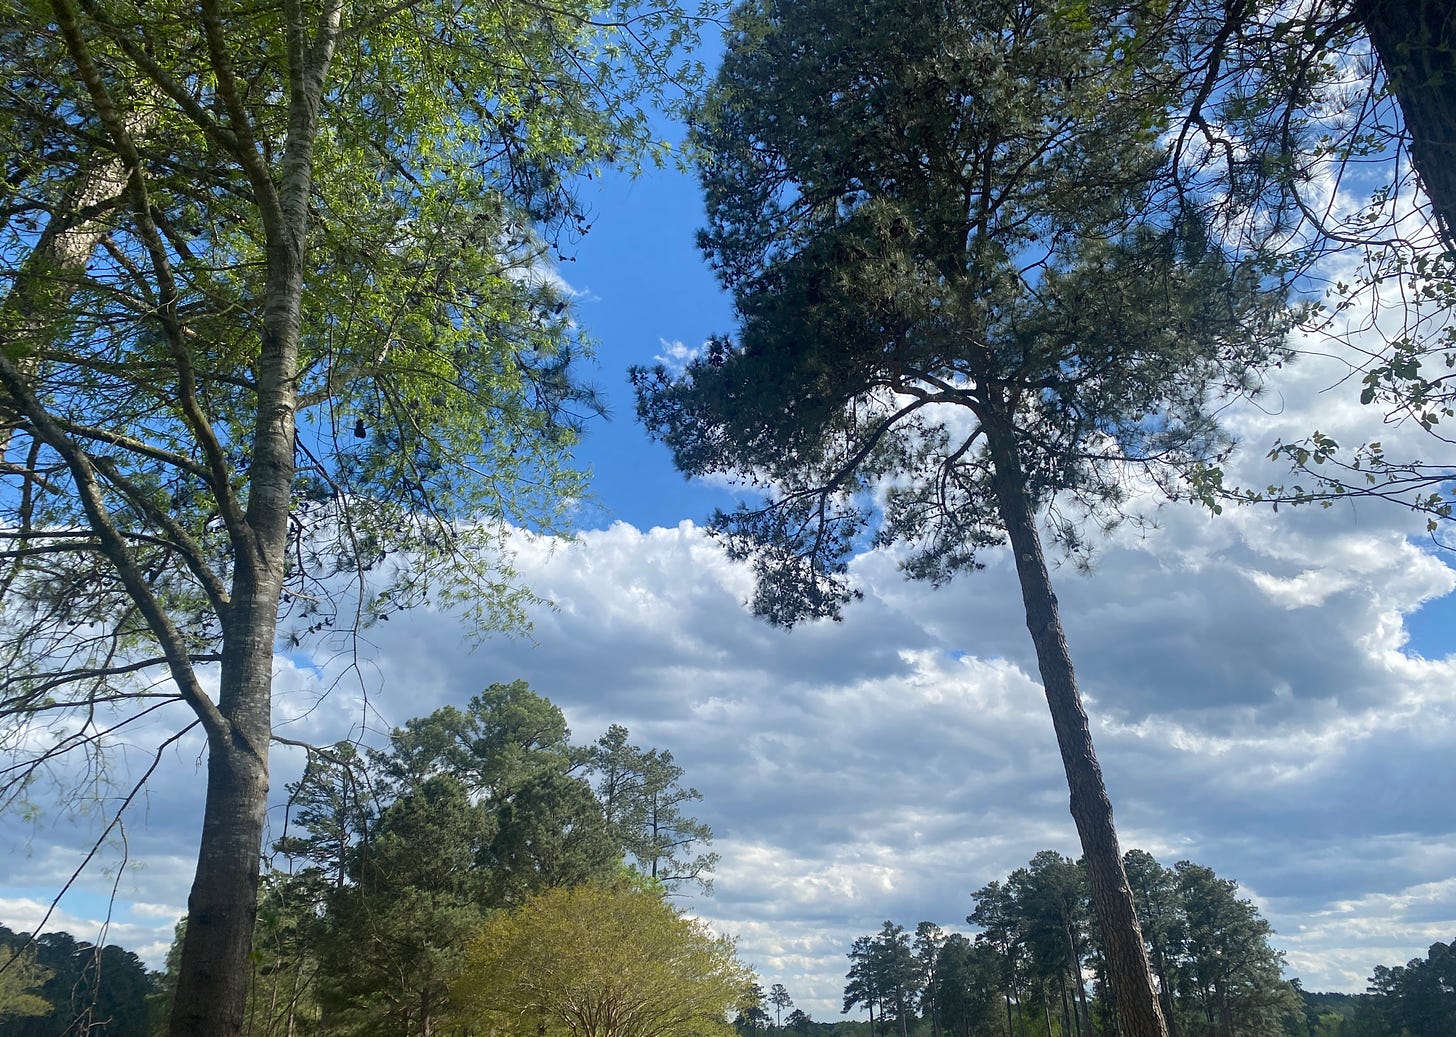 Tall trees stand against a bright blue sky with white clouds